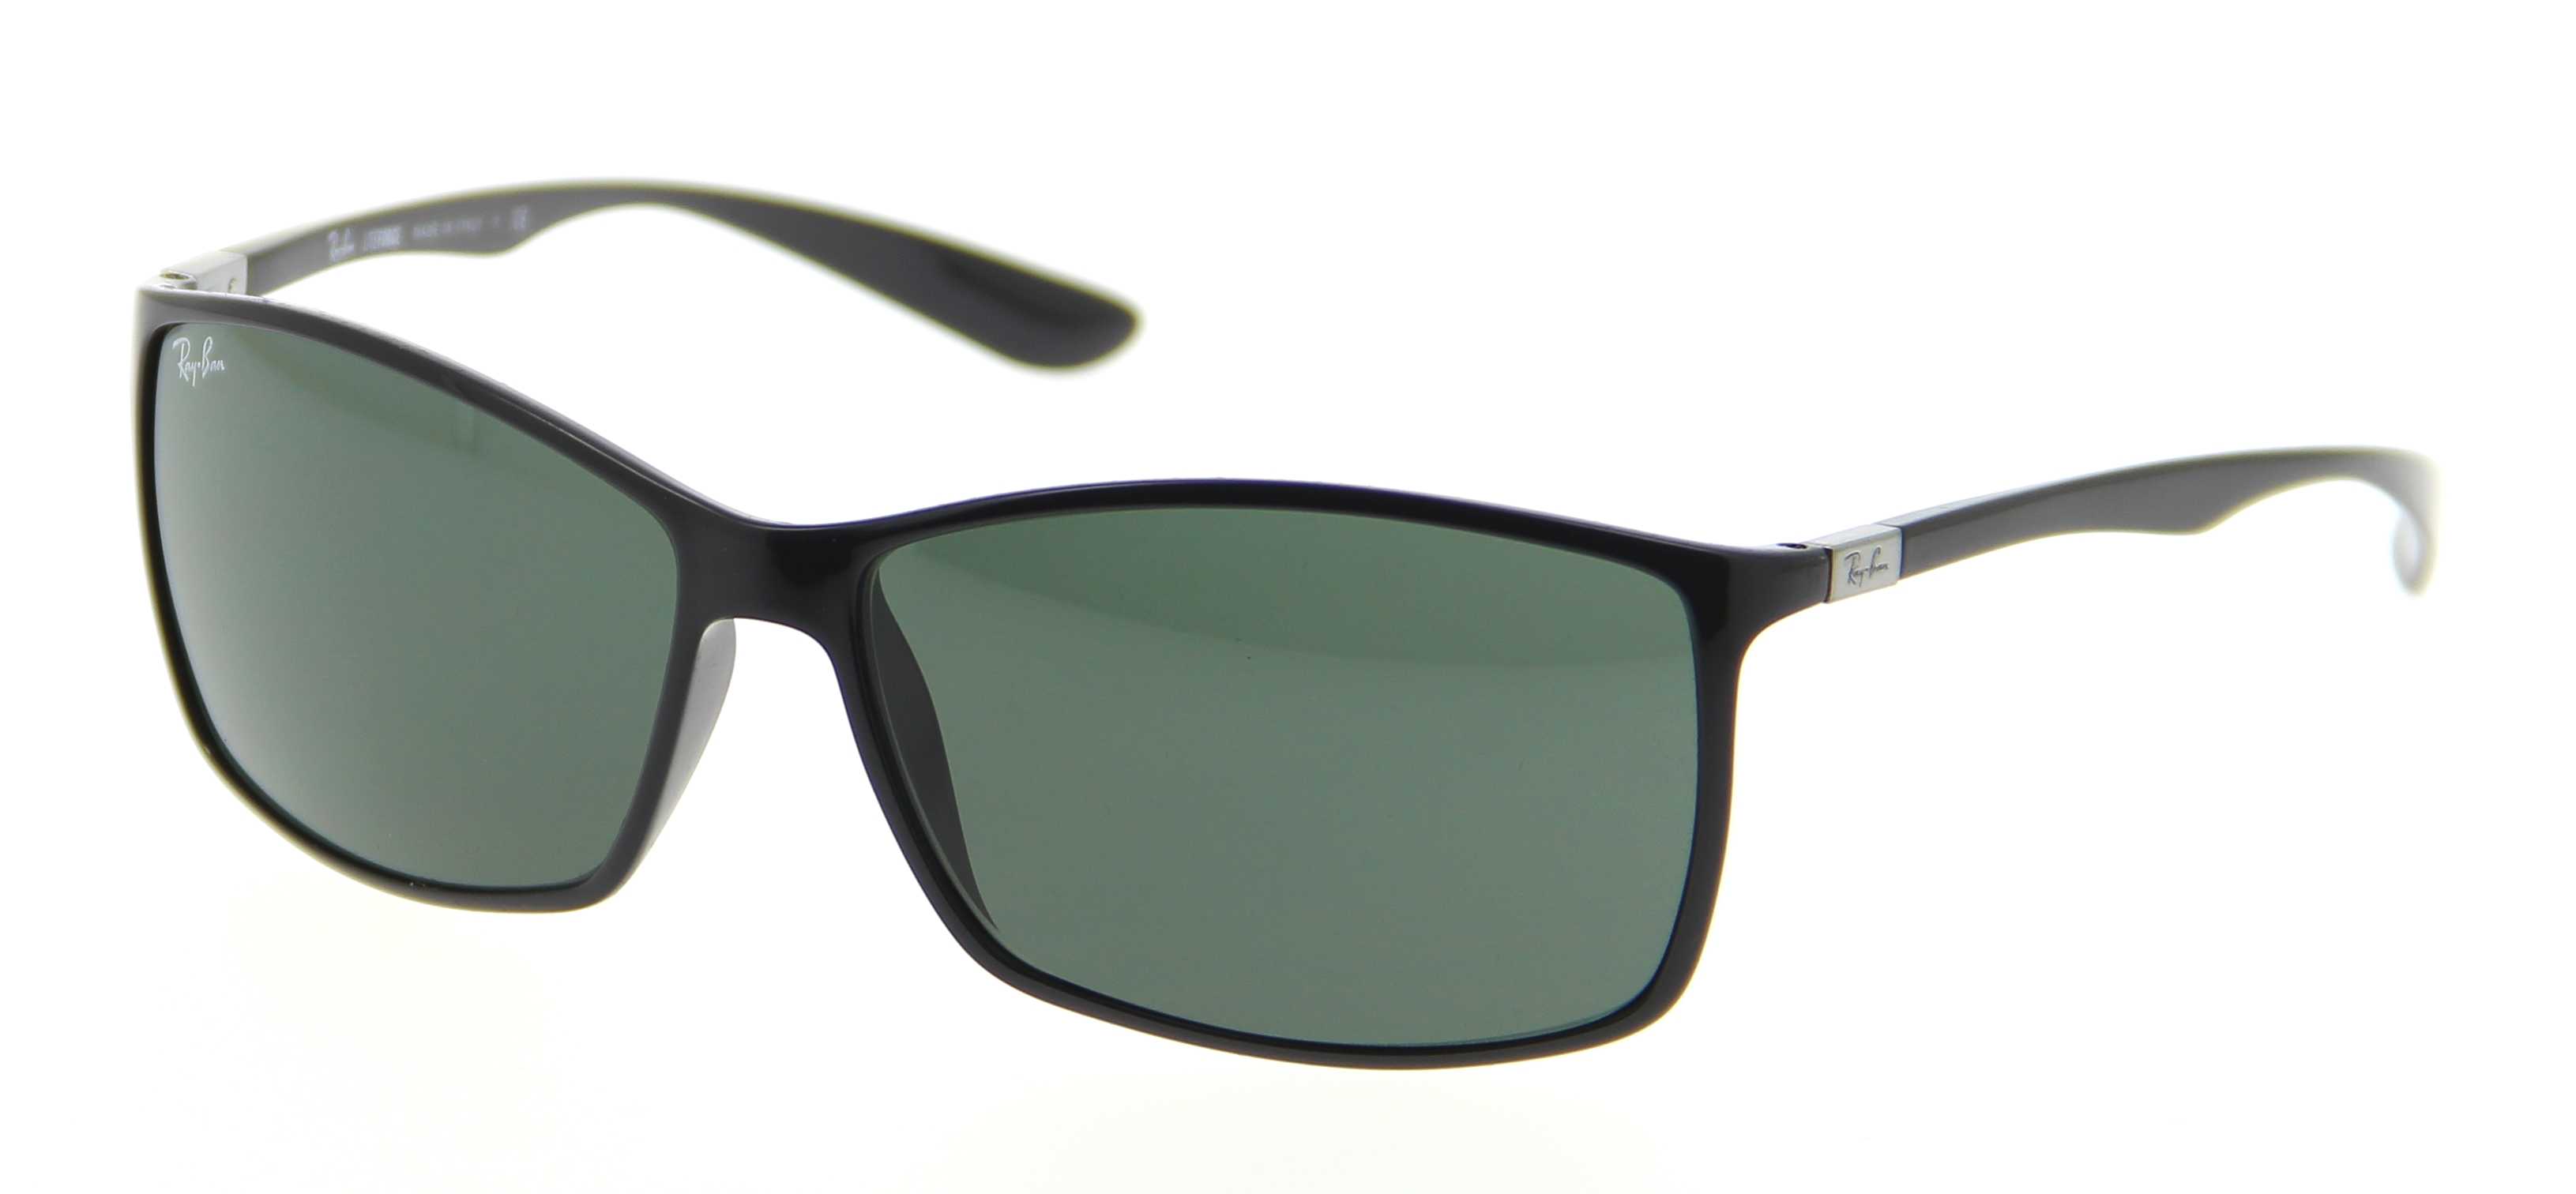 ray ban rb4179 liteforce 601 71